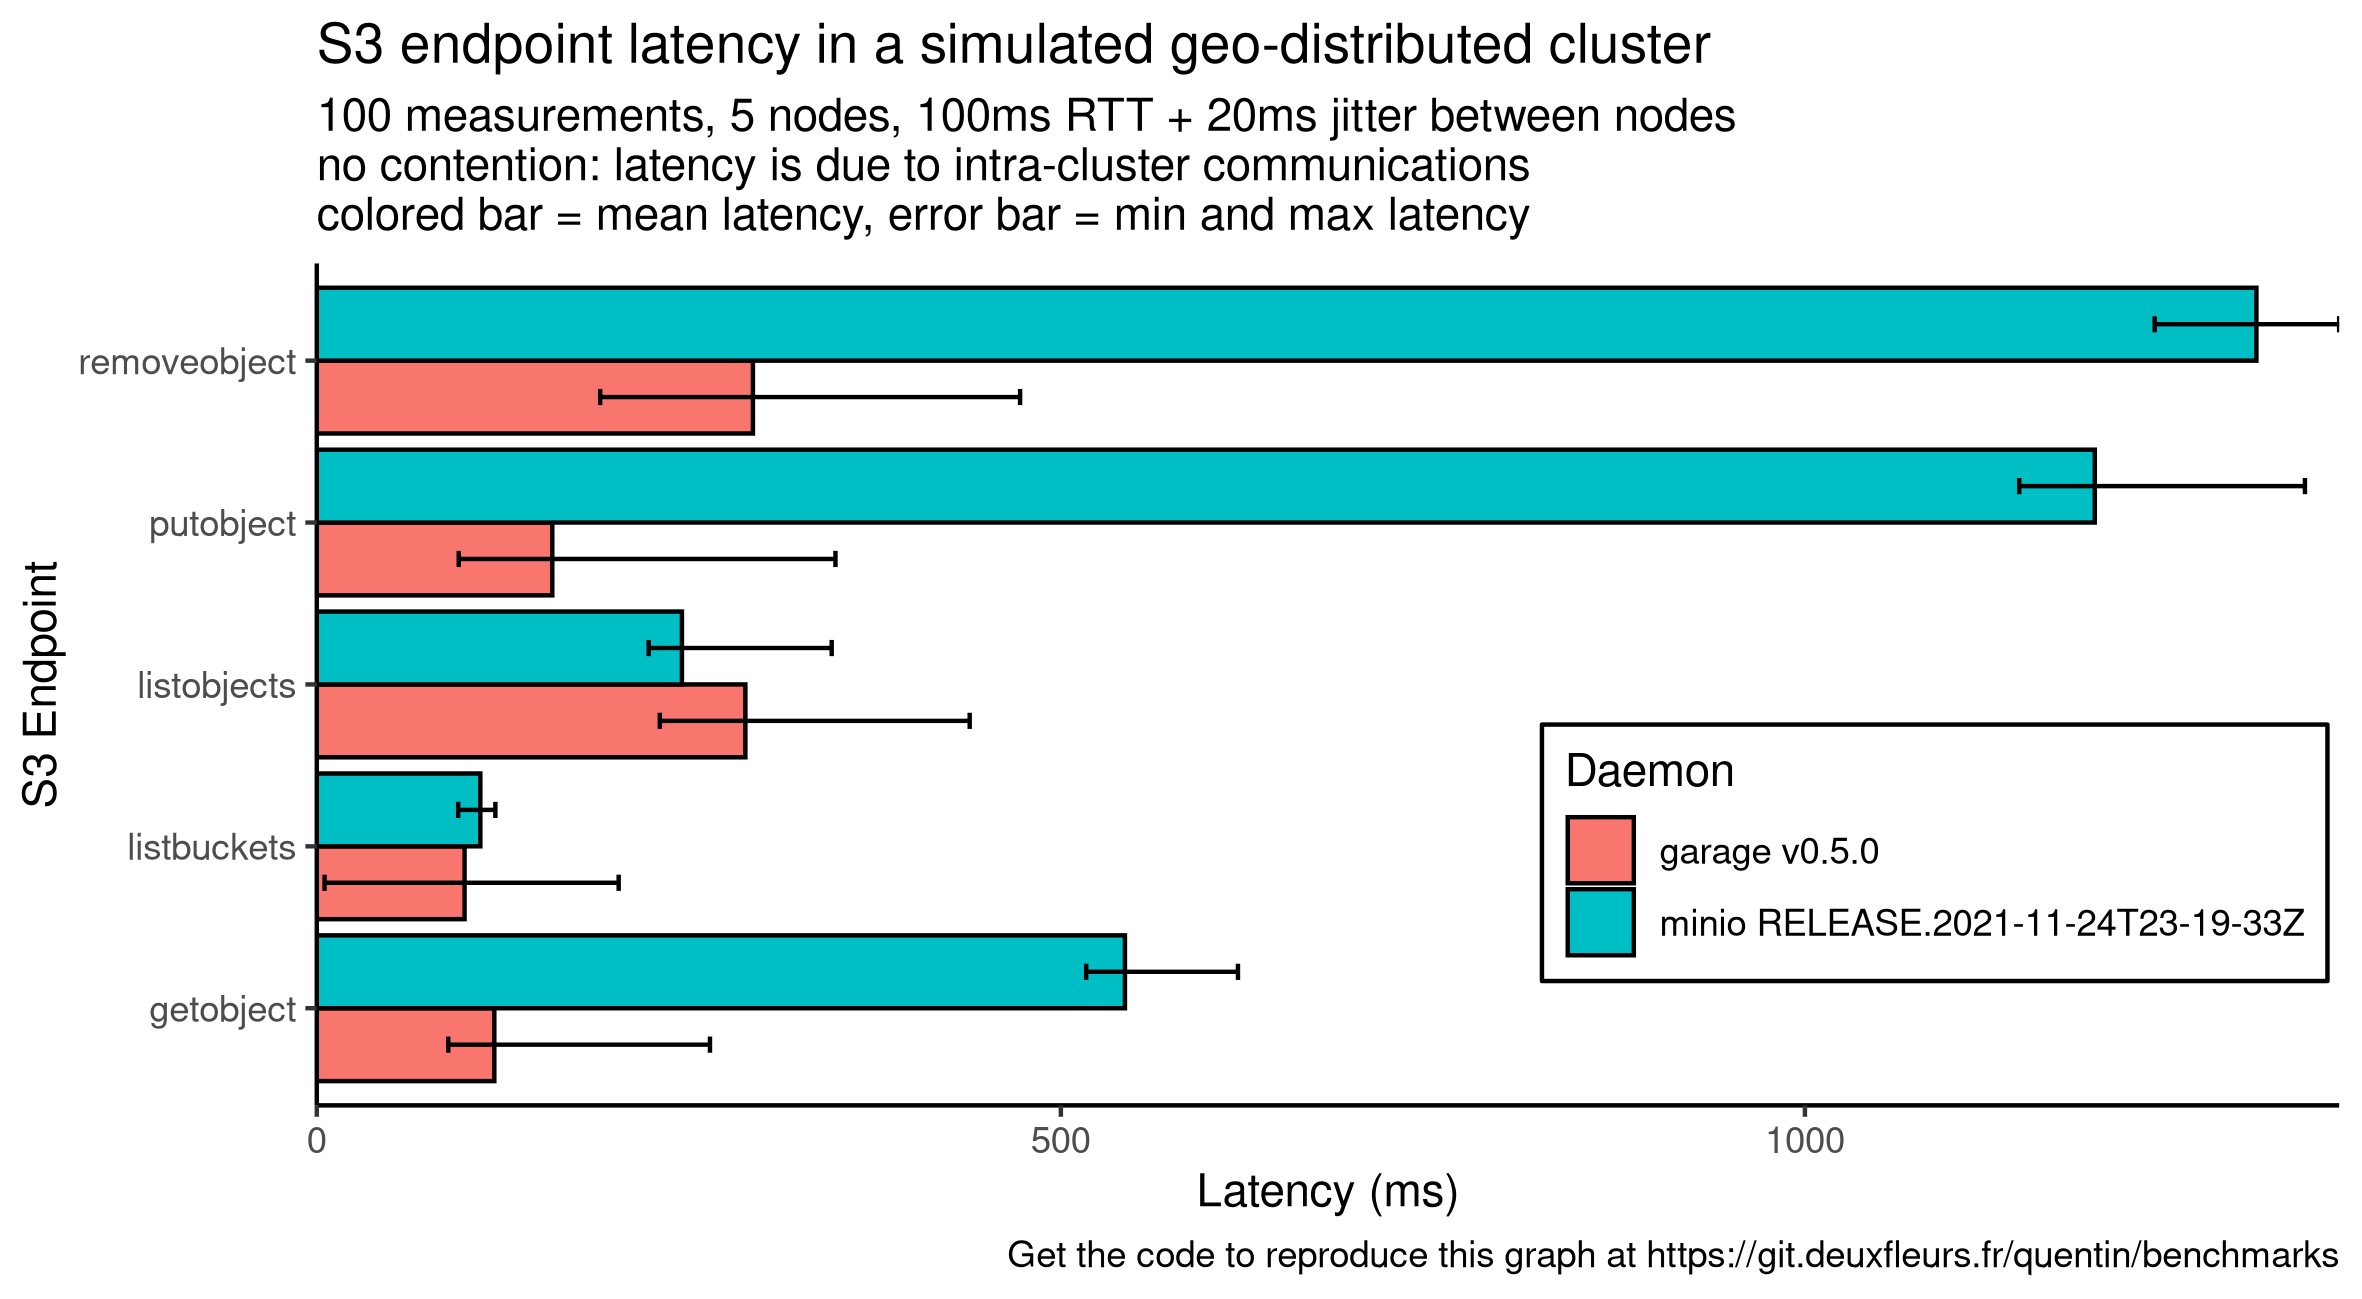 Comparison of endpoints latency for minio and garage